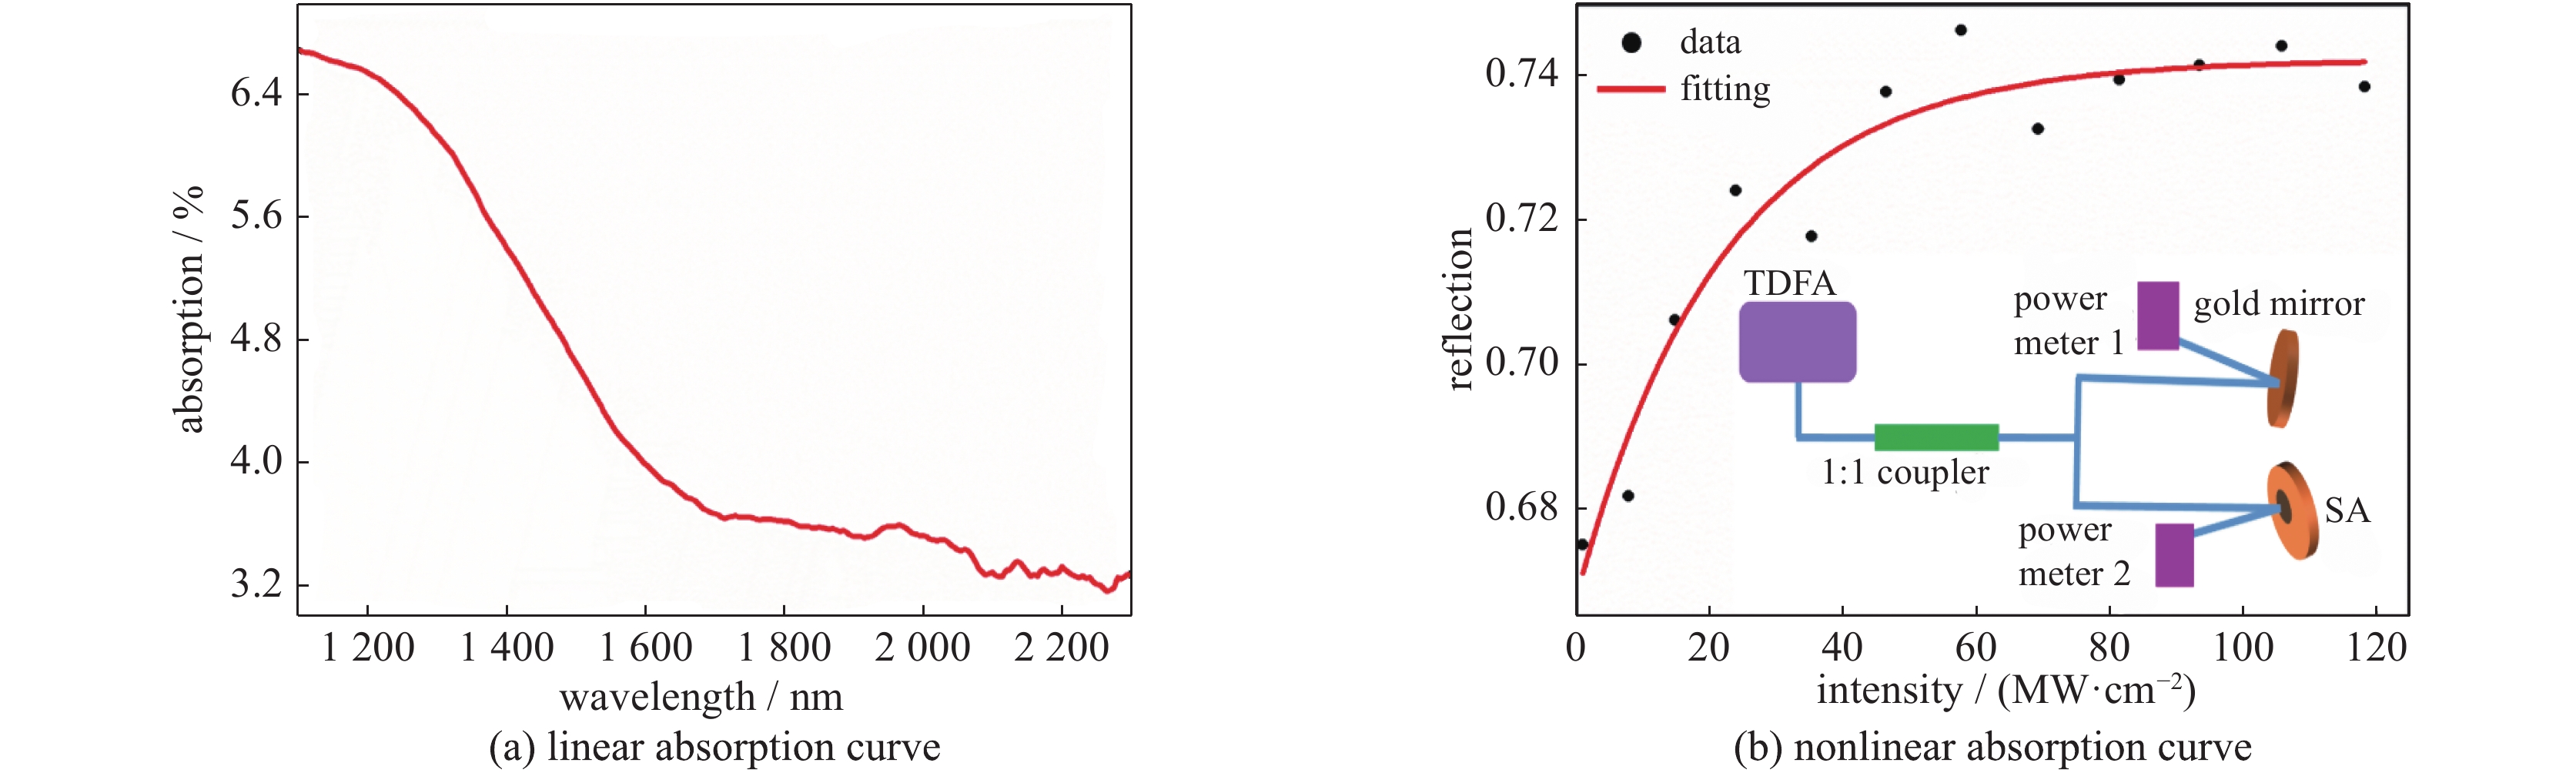 Linear absorption curve and nonlinear absorption curve of the liquid-processed NbSe2 nanoparticles